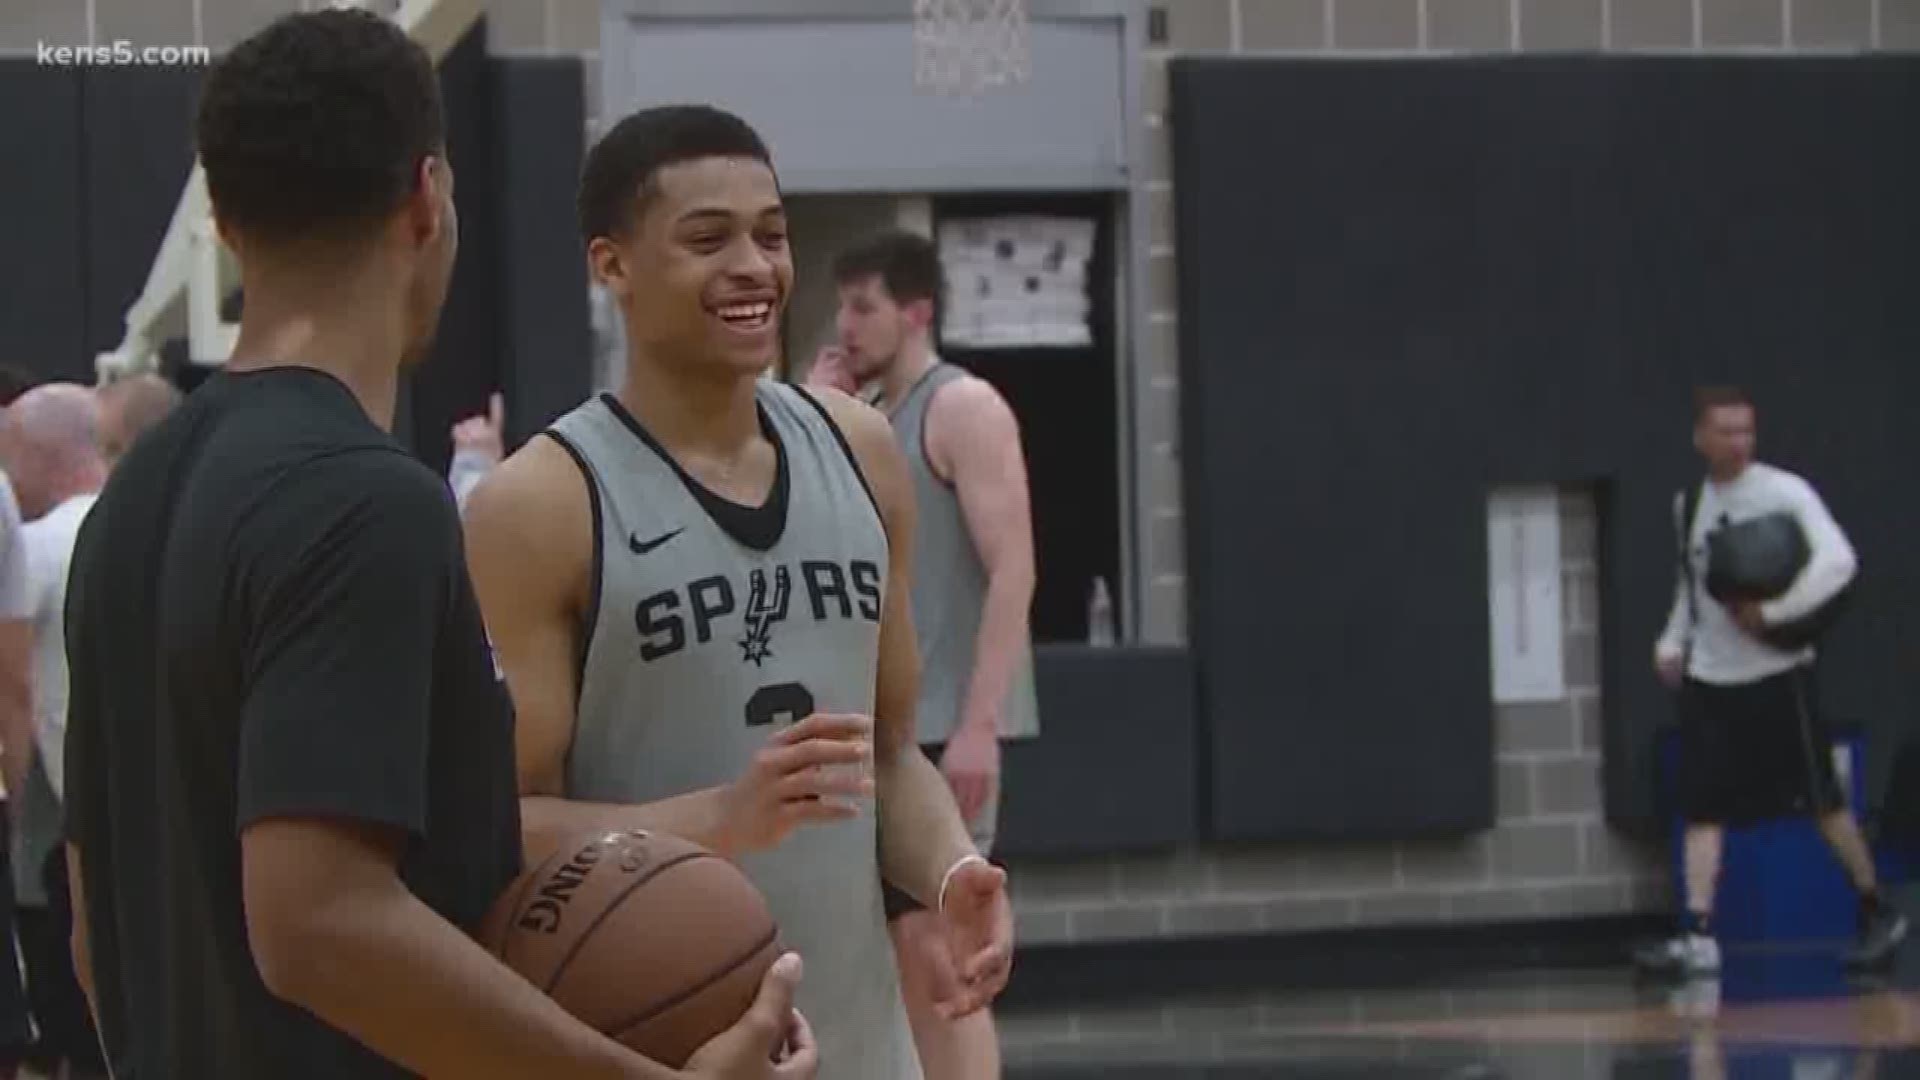 San Antonio's quest for their next NBA Championship begins in earnest on Monday. We sat down with one of the newest Spurs hoping to make an impact.